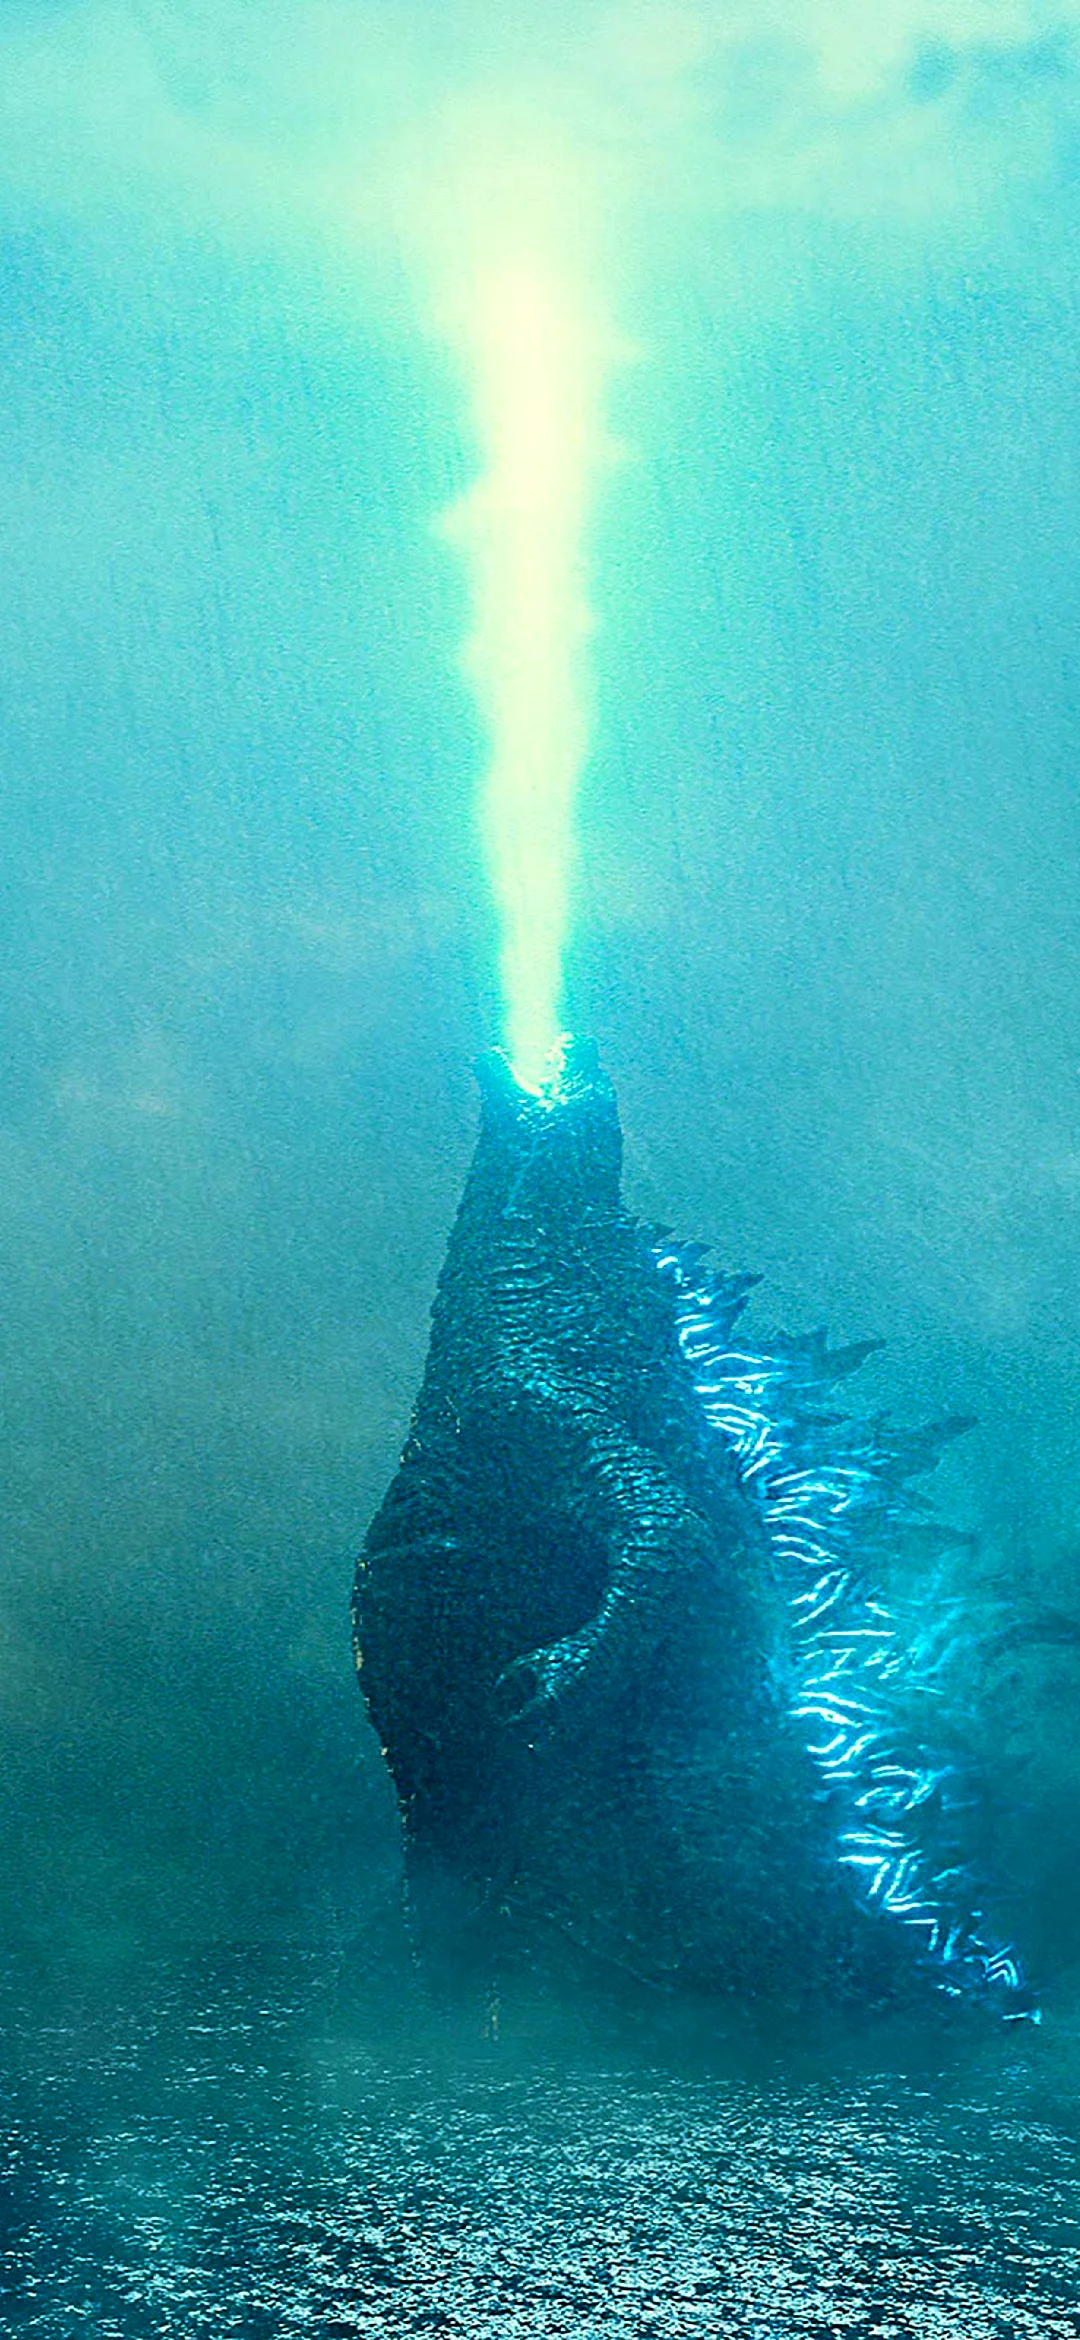 Godzilla King Of The Monsters 2019 Wallpaper for iPhone 12 mini